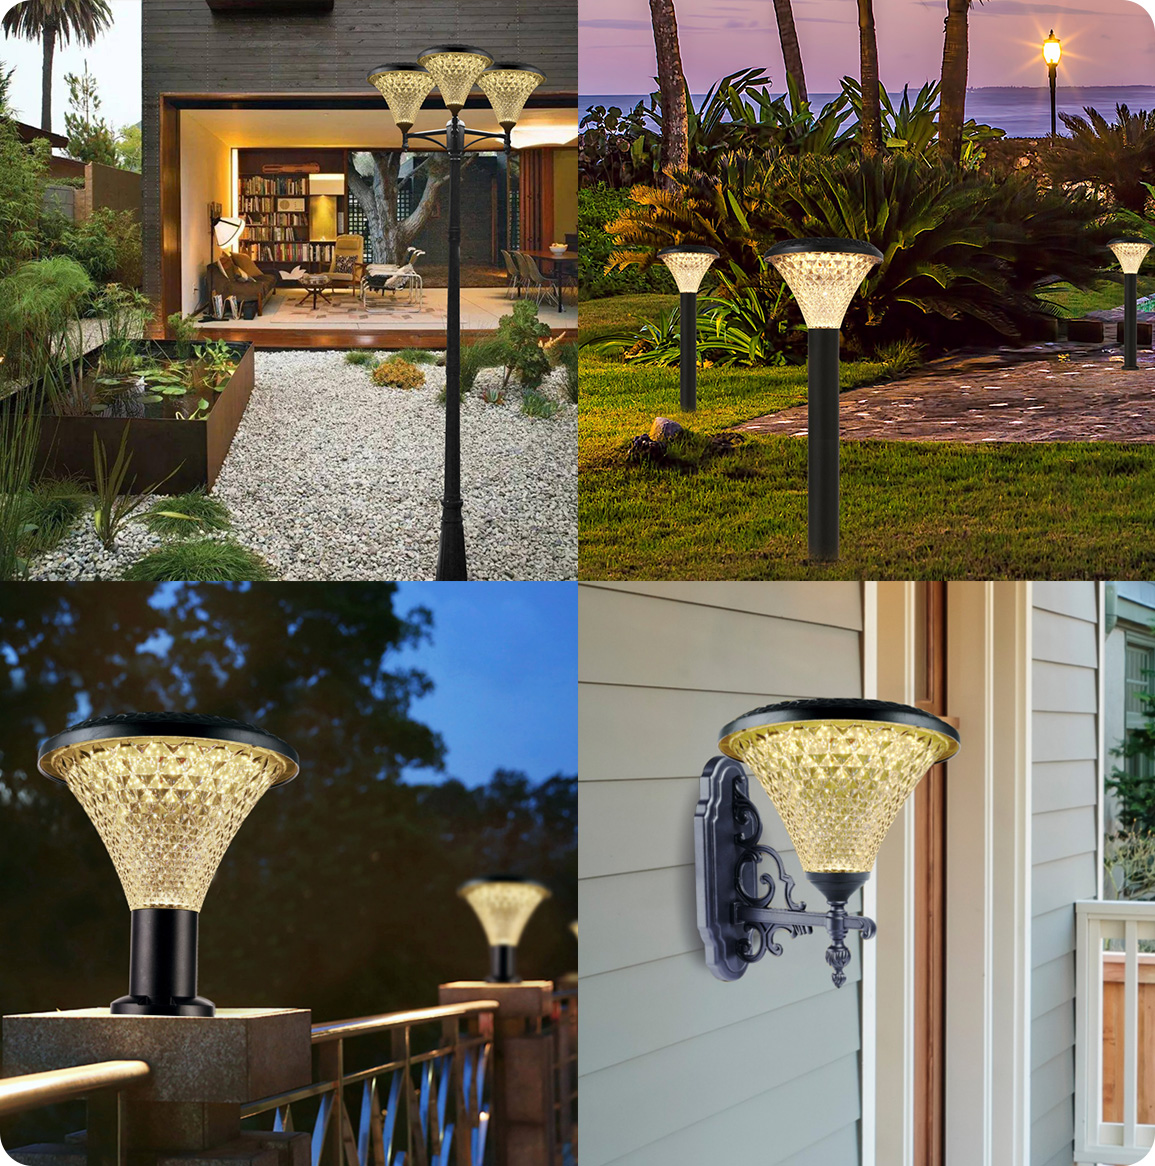 The New-developed Aluminium all in one Solar courtyard Lights